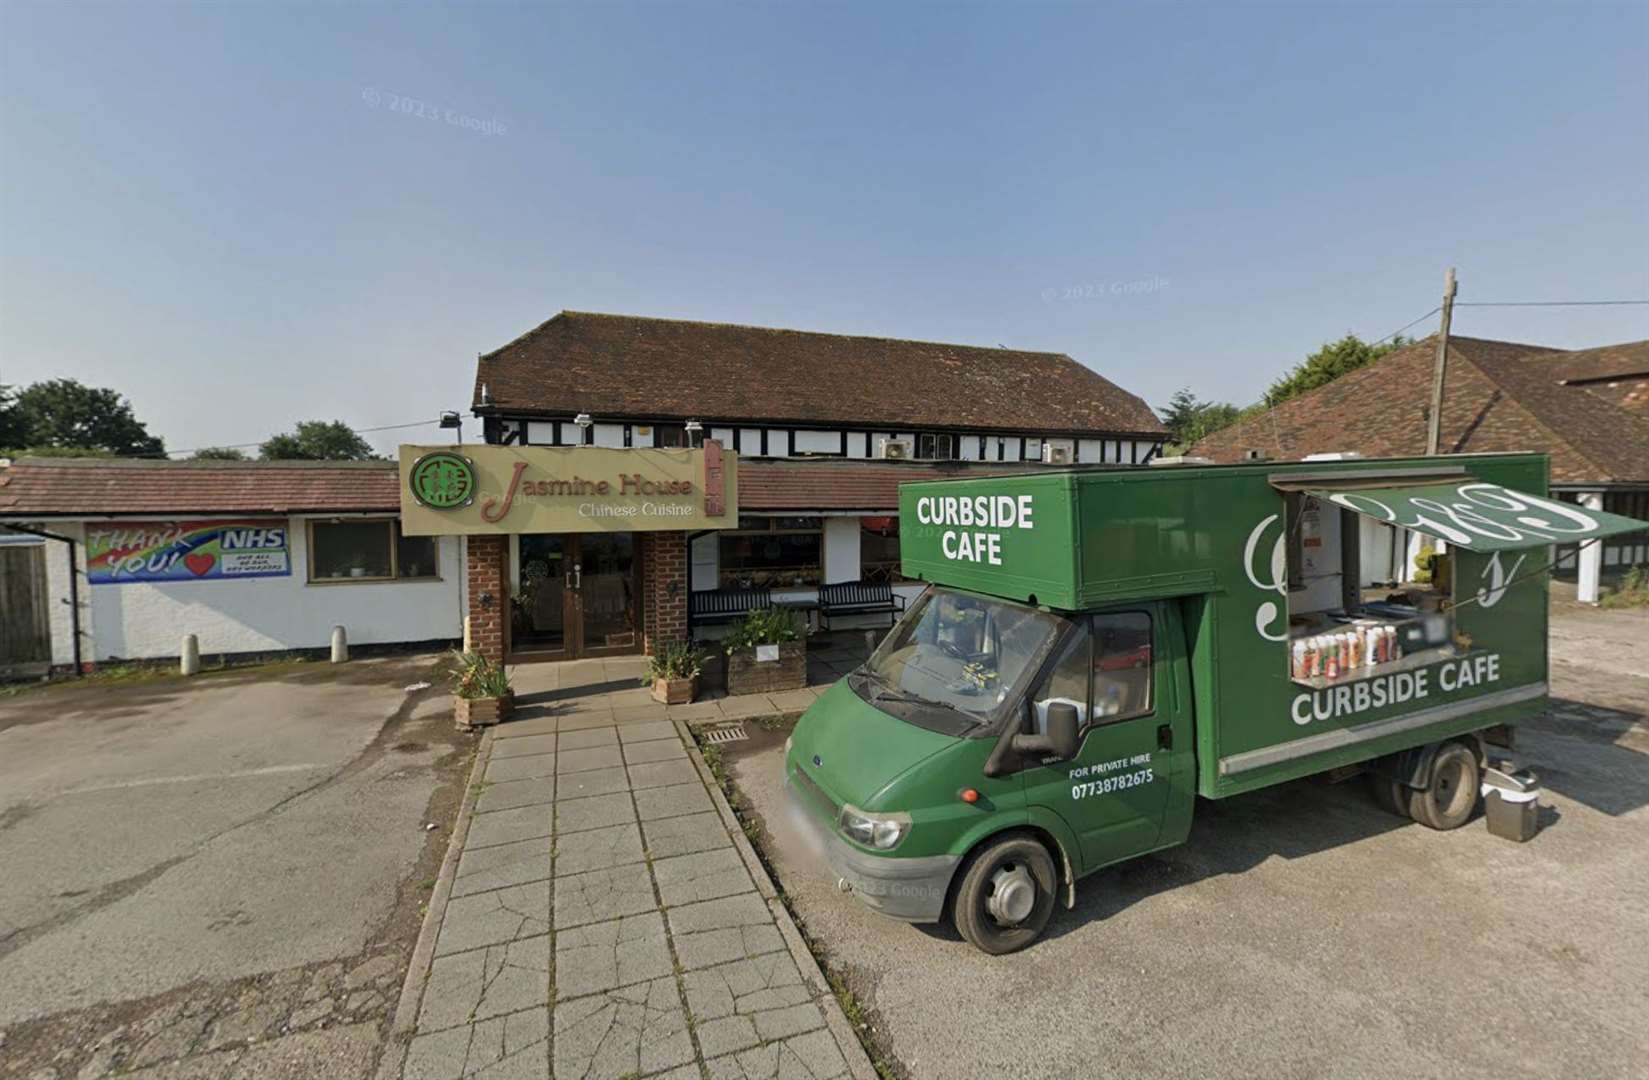 The former Little Chef in Charing is now Jasmine House Chinese Cuisine. Photo: Google